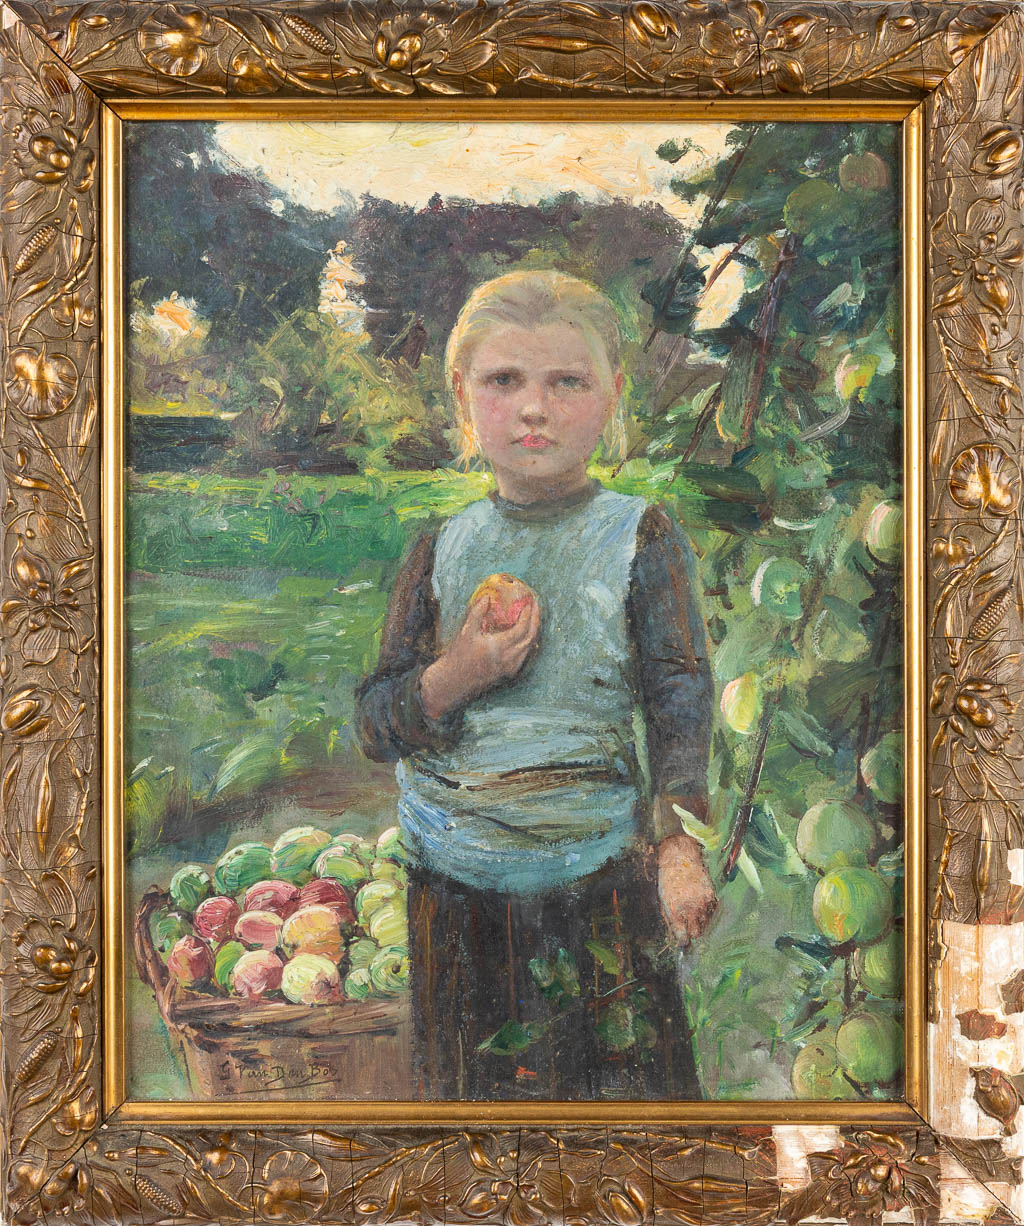 Georges VAN DEN BOS (1853-1911) 'Girl' a painting of a young girl with an apple, oil on panel. (33 x 41 cm)